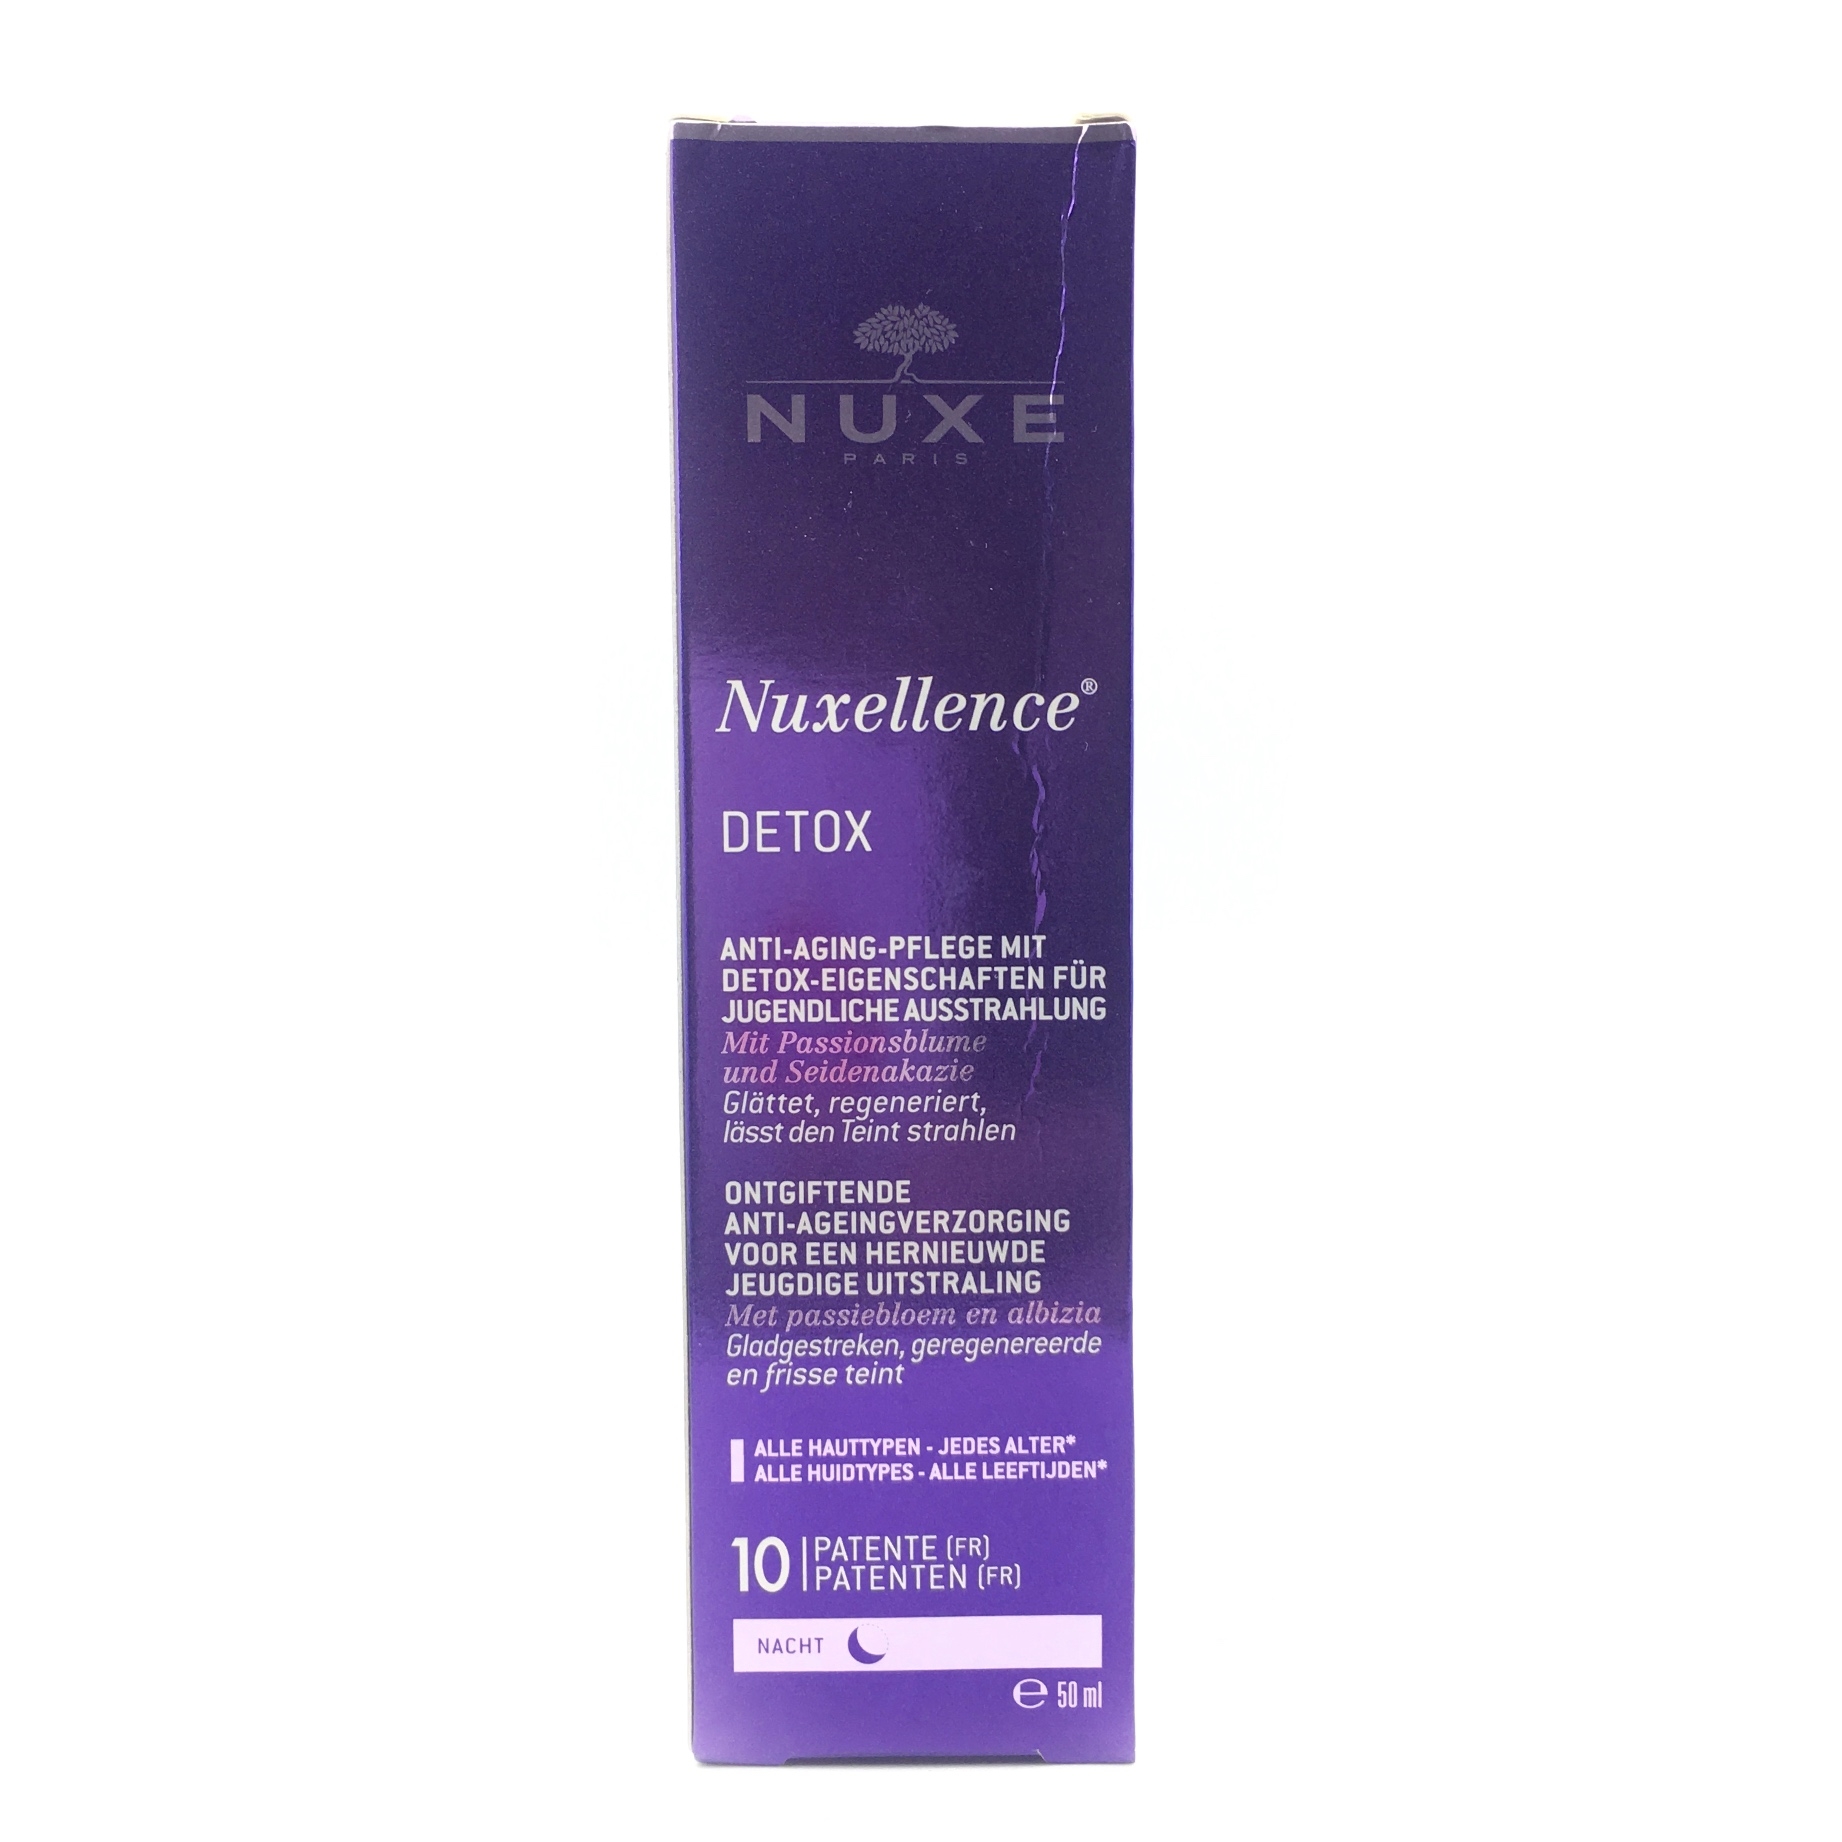 Nuxe Nuxellence Detox Detoxifying And Youth Revealing Anti-Aging Care Skin Care